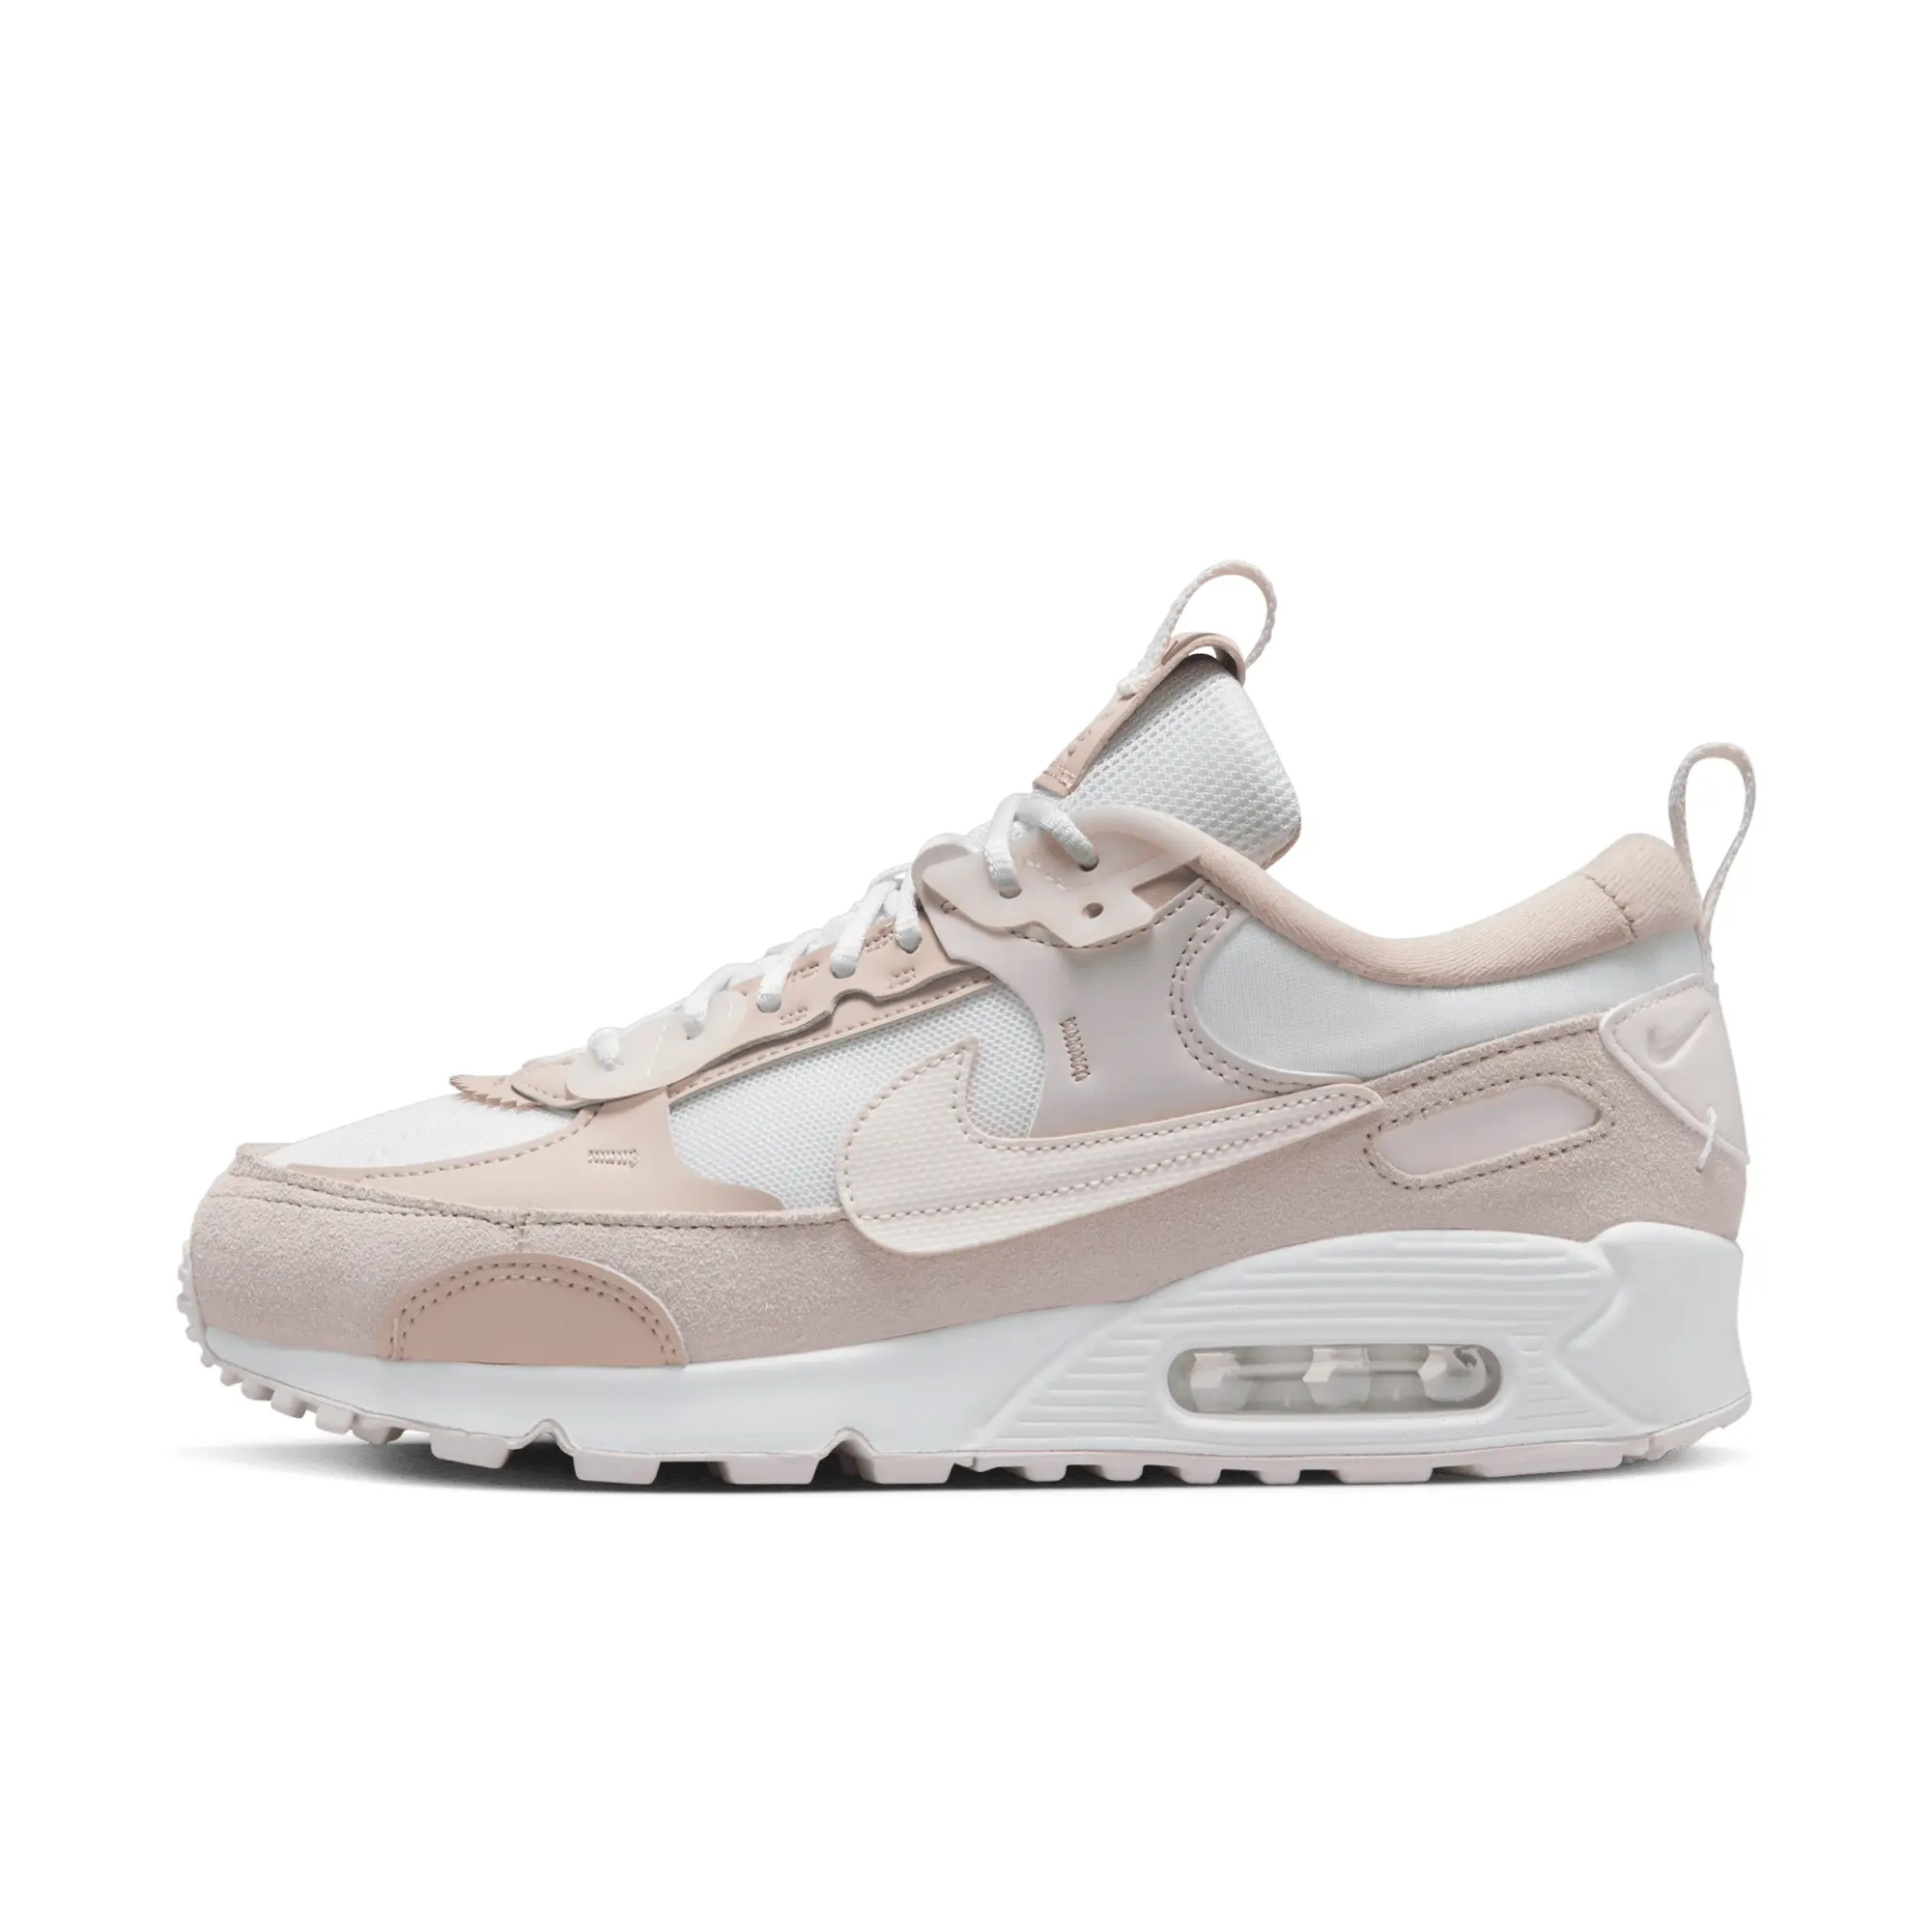 Nike Air Max 90 Futura Trainers Summit White Light Soft Pink Barely Rose